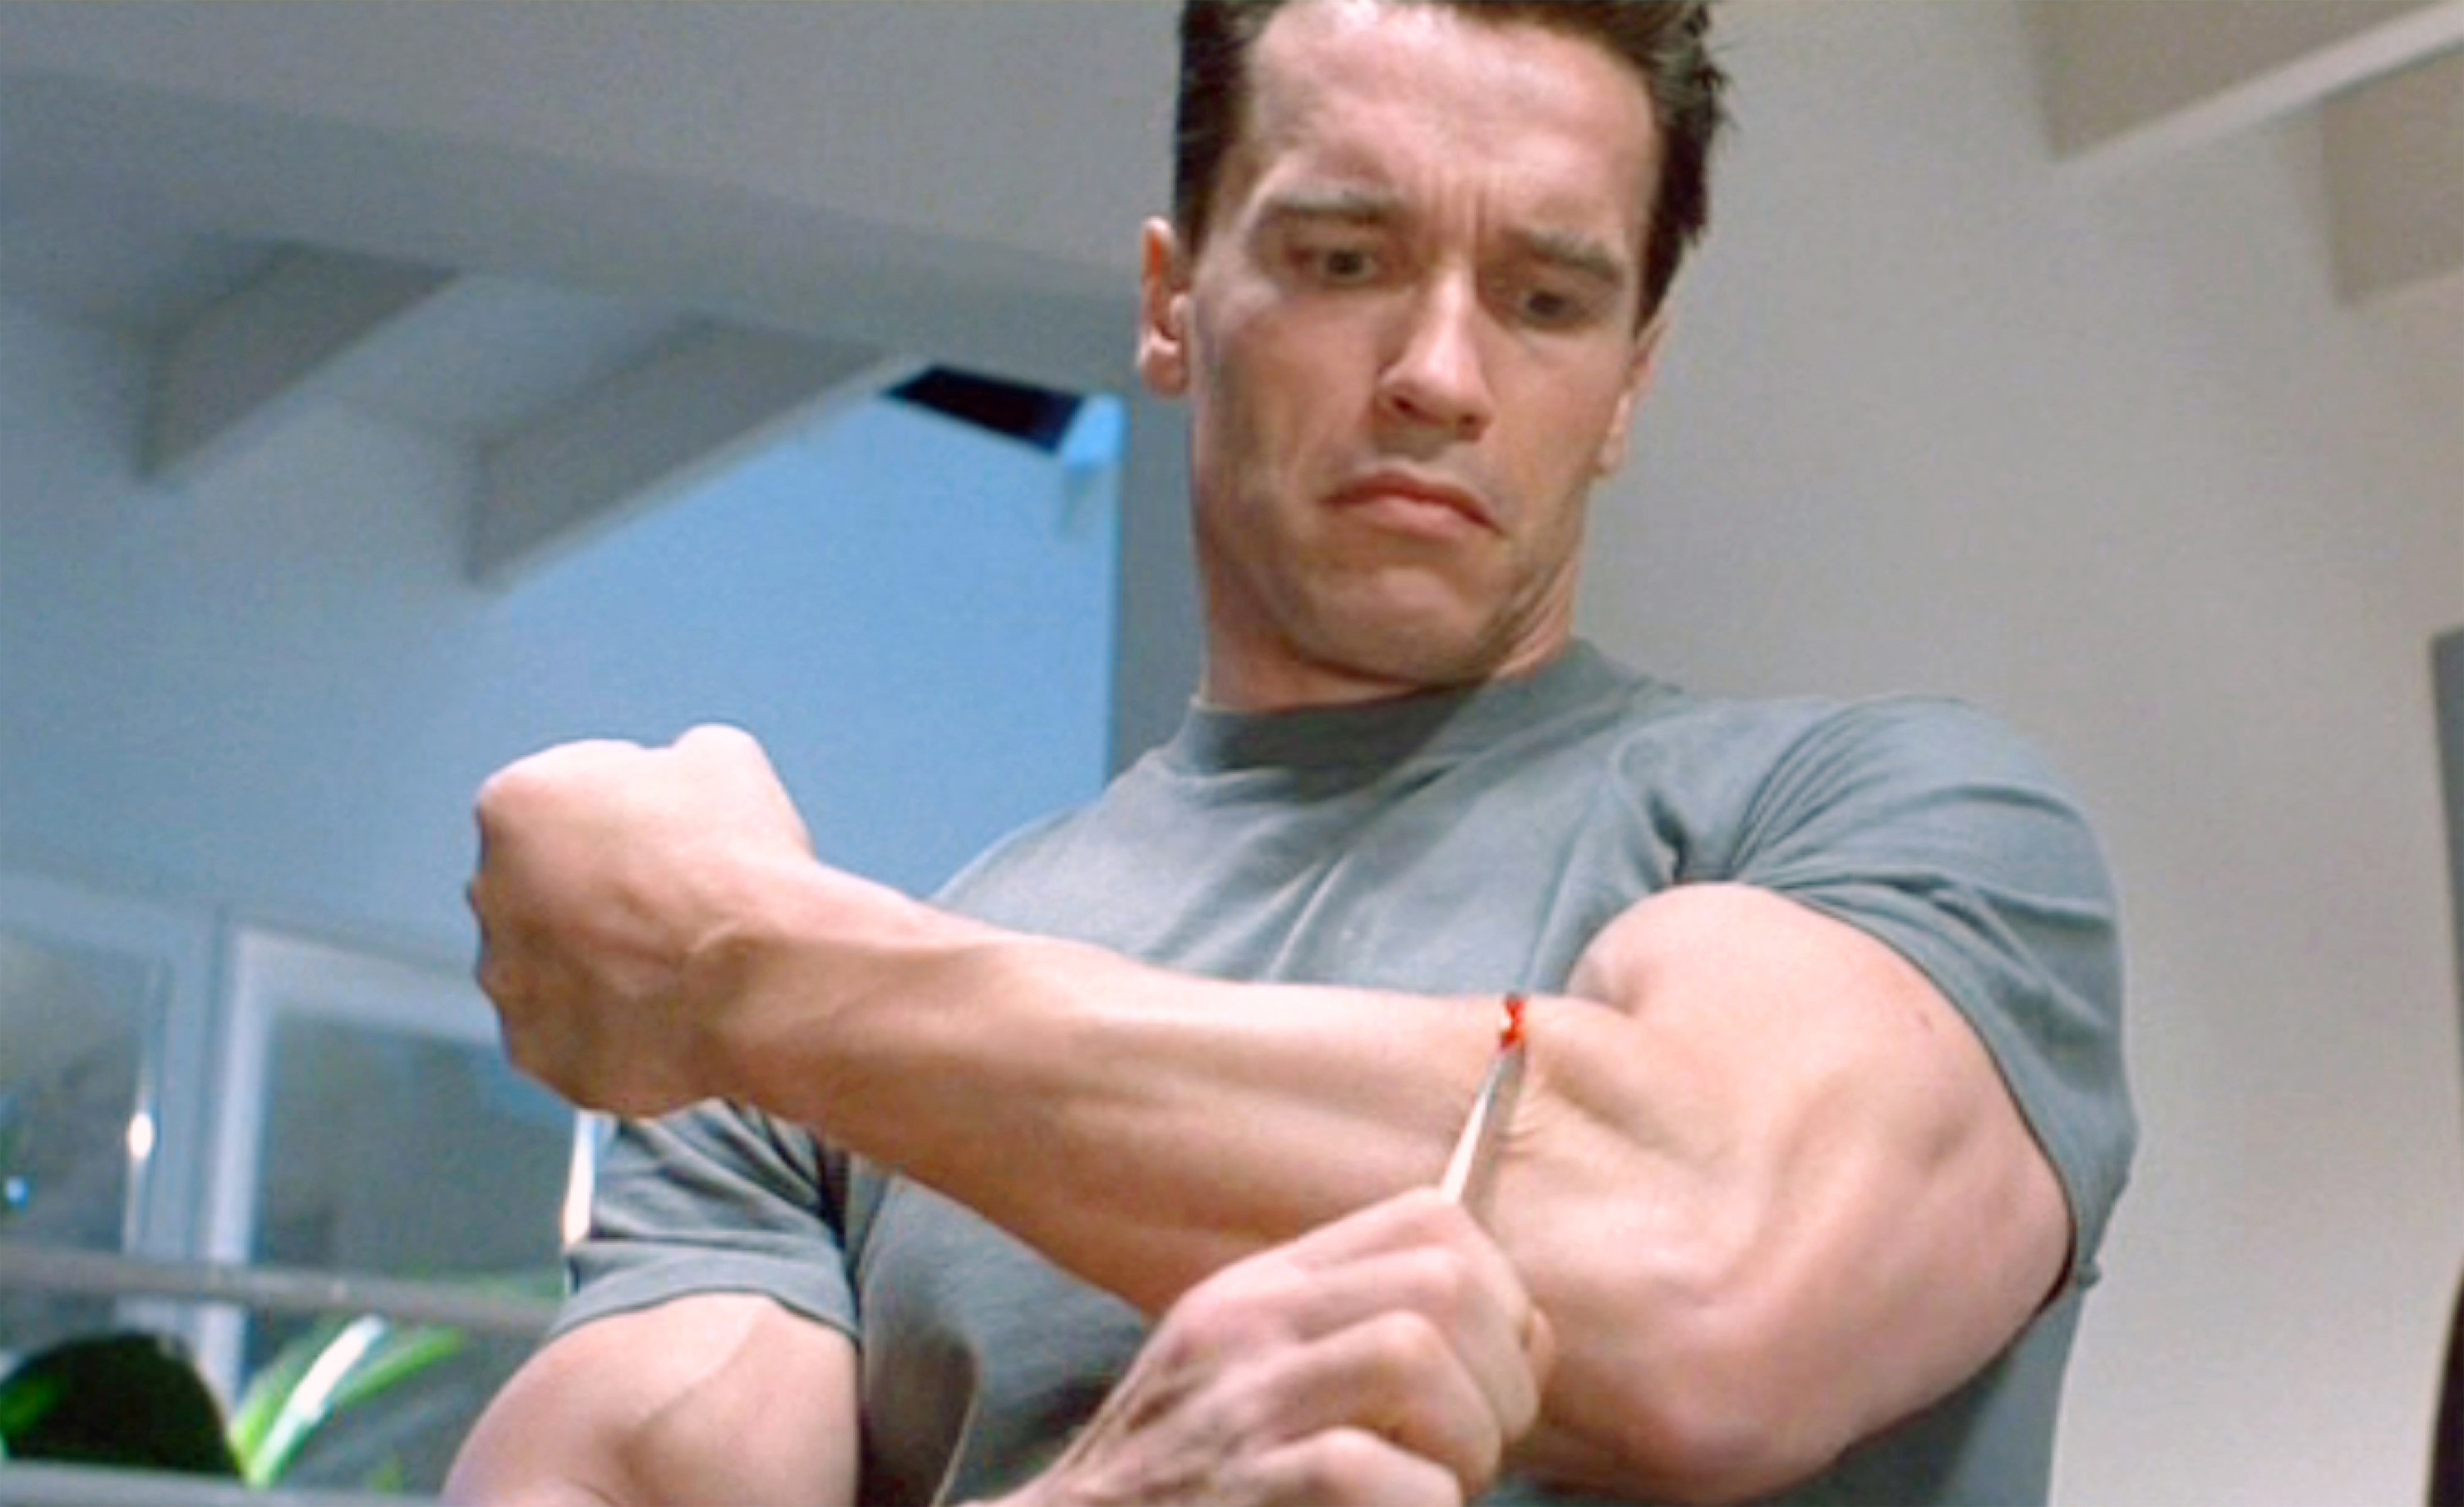 Arnold Schwarzenegger (as the T-800 Terminator) begins to cut the living tissue of his forearm to reveal metal endoskeleton